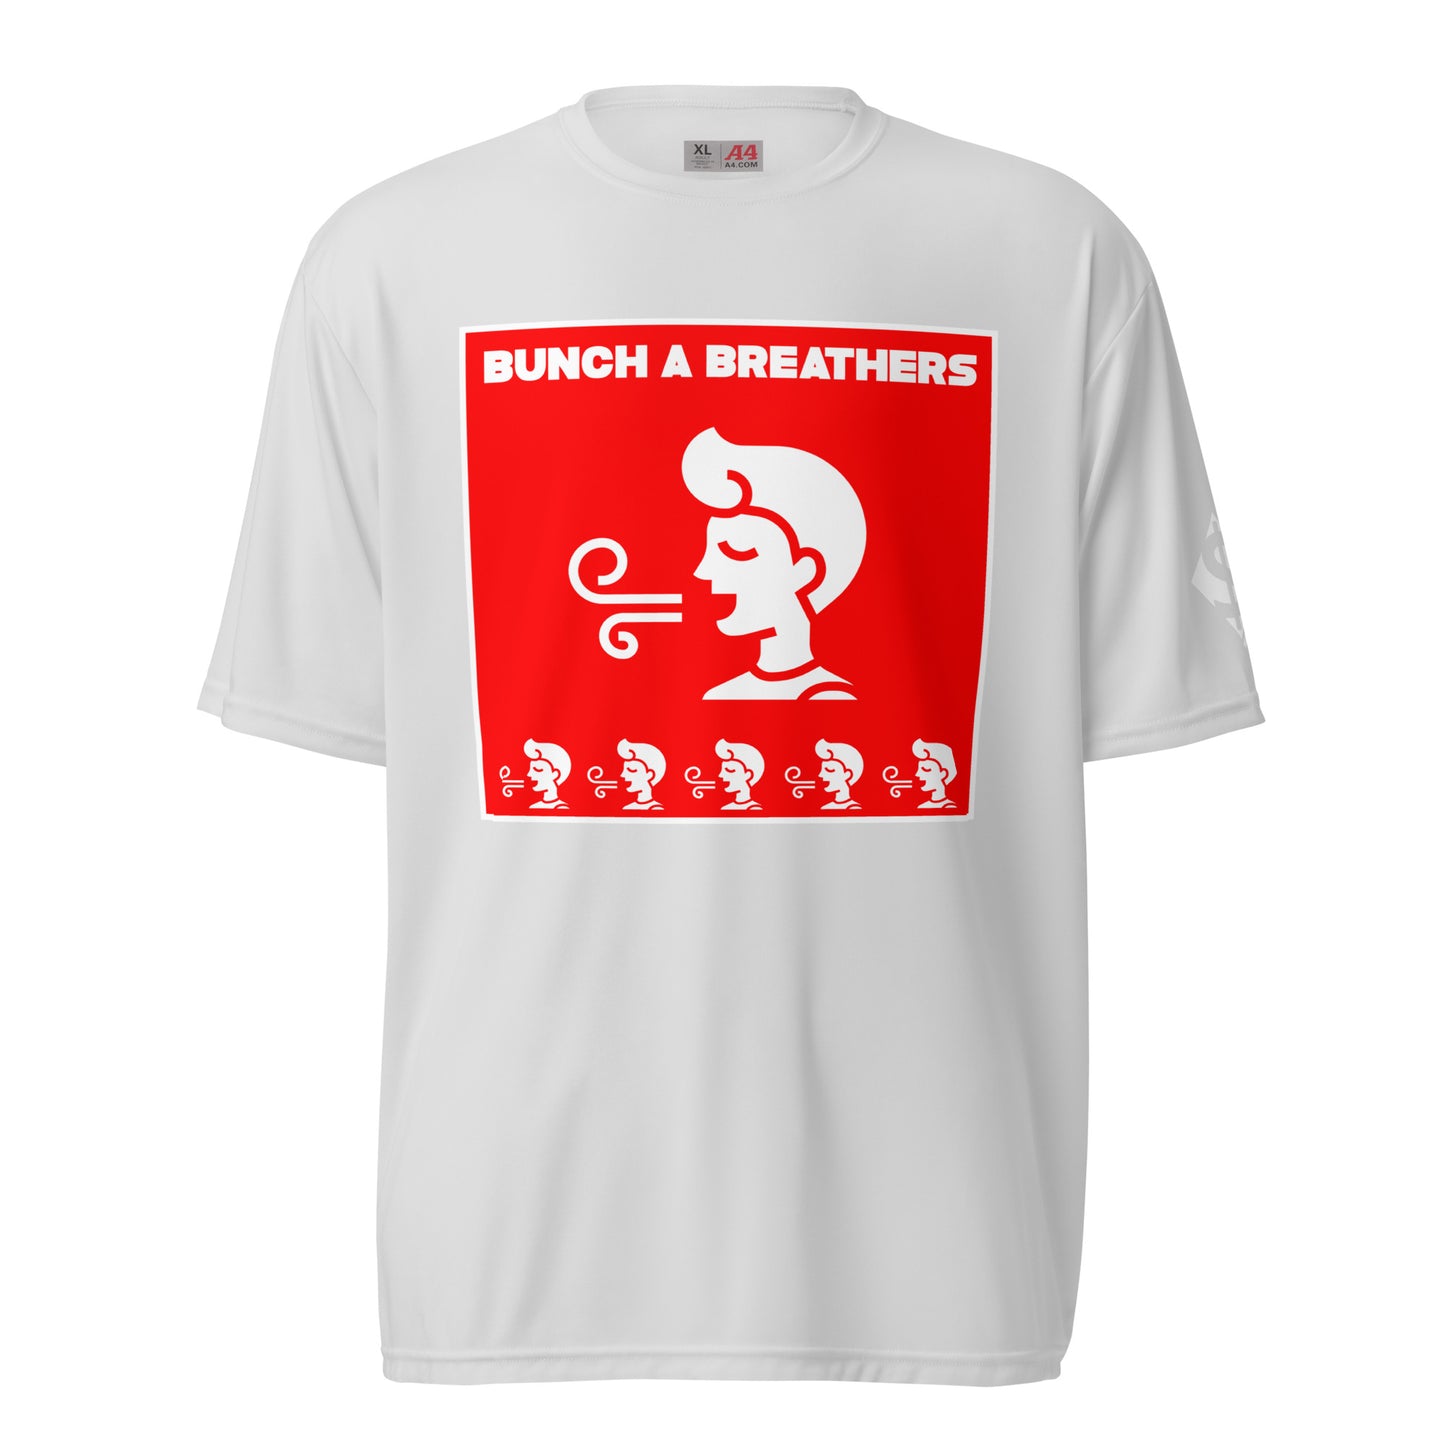 Bunch A Breathers - Premium Tee